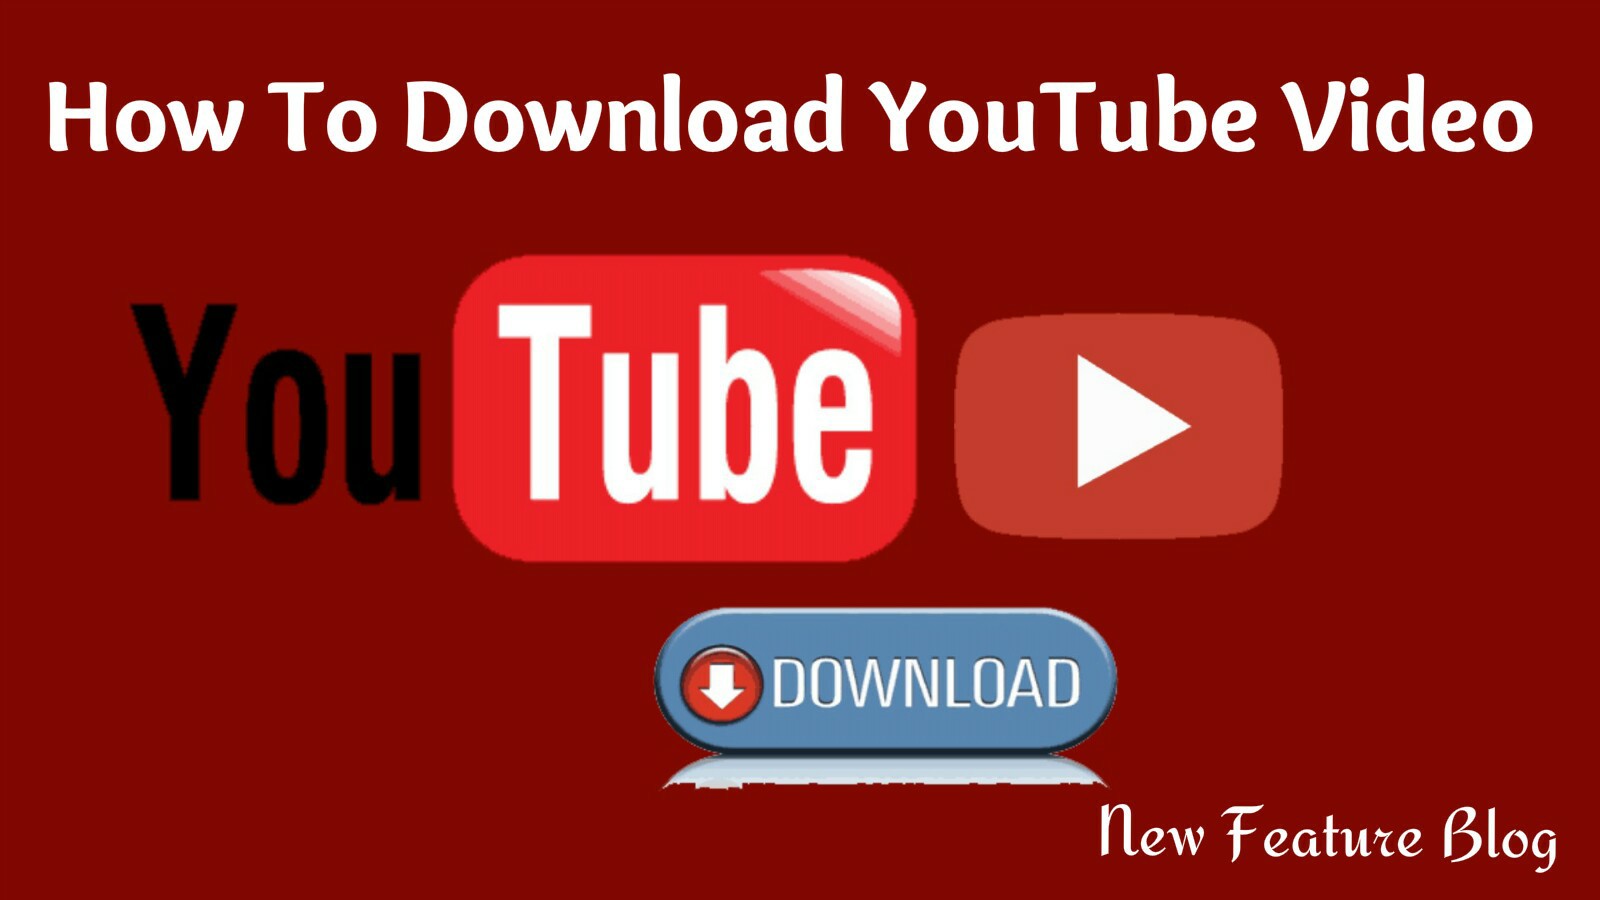 YouTube Video Download Kaise Kare - New Feature Blog